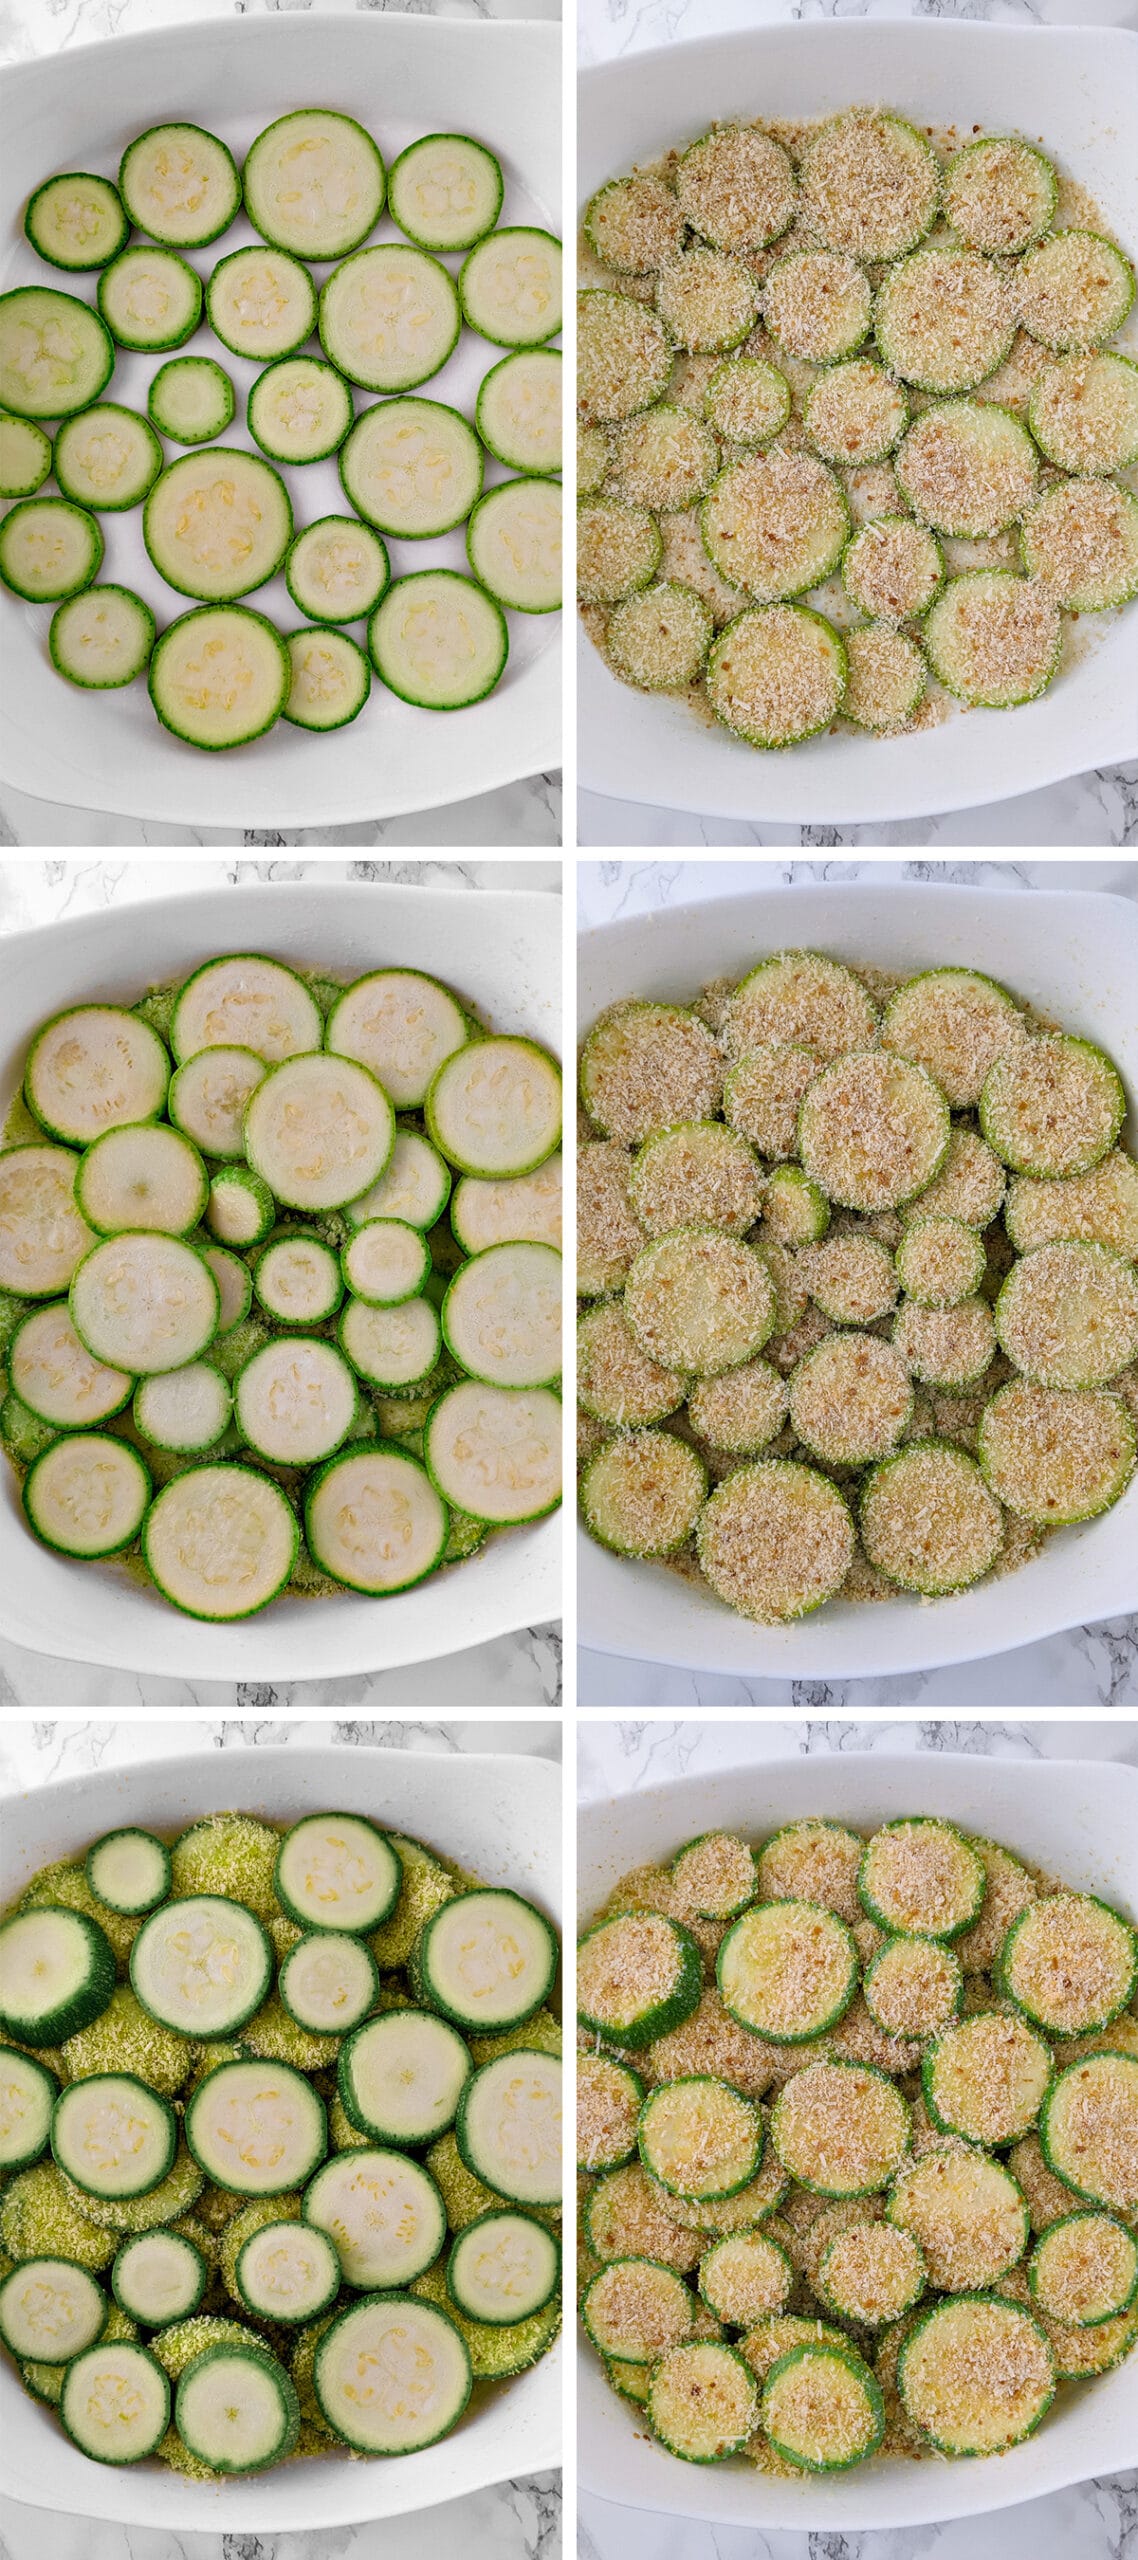 Step-by-step on how to arrange the zucchini casserole.